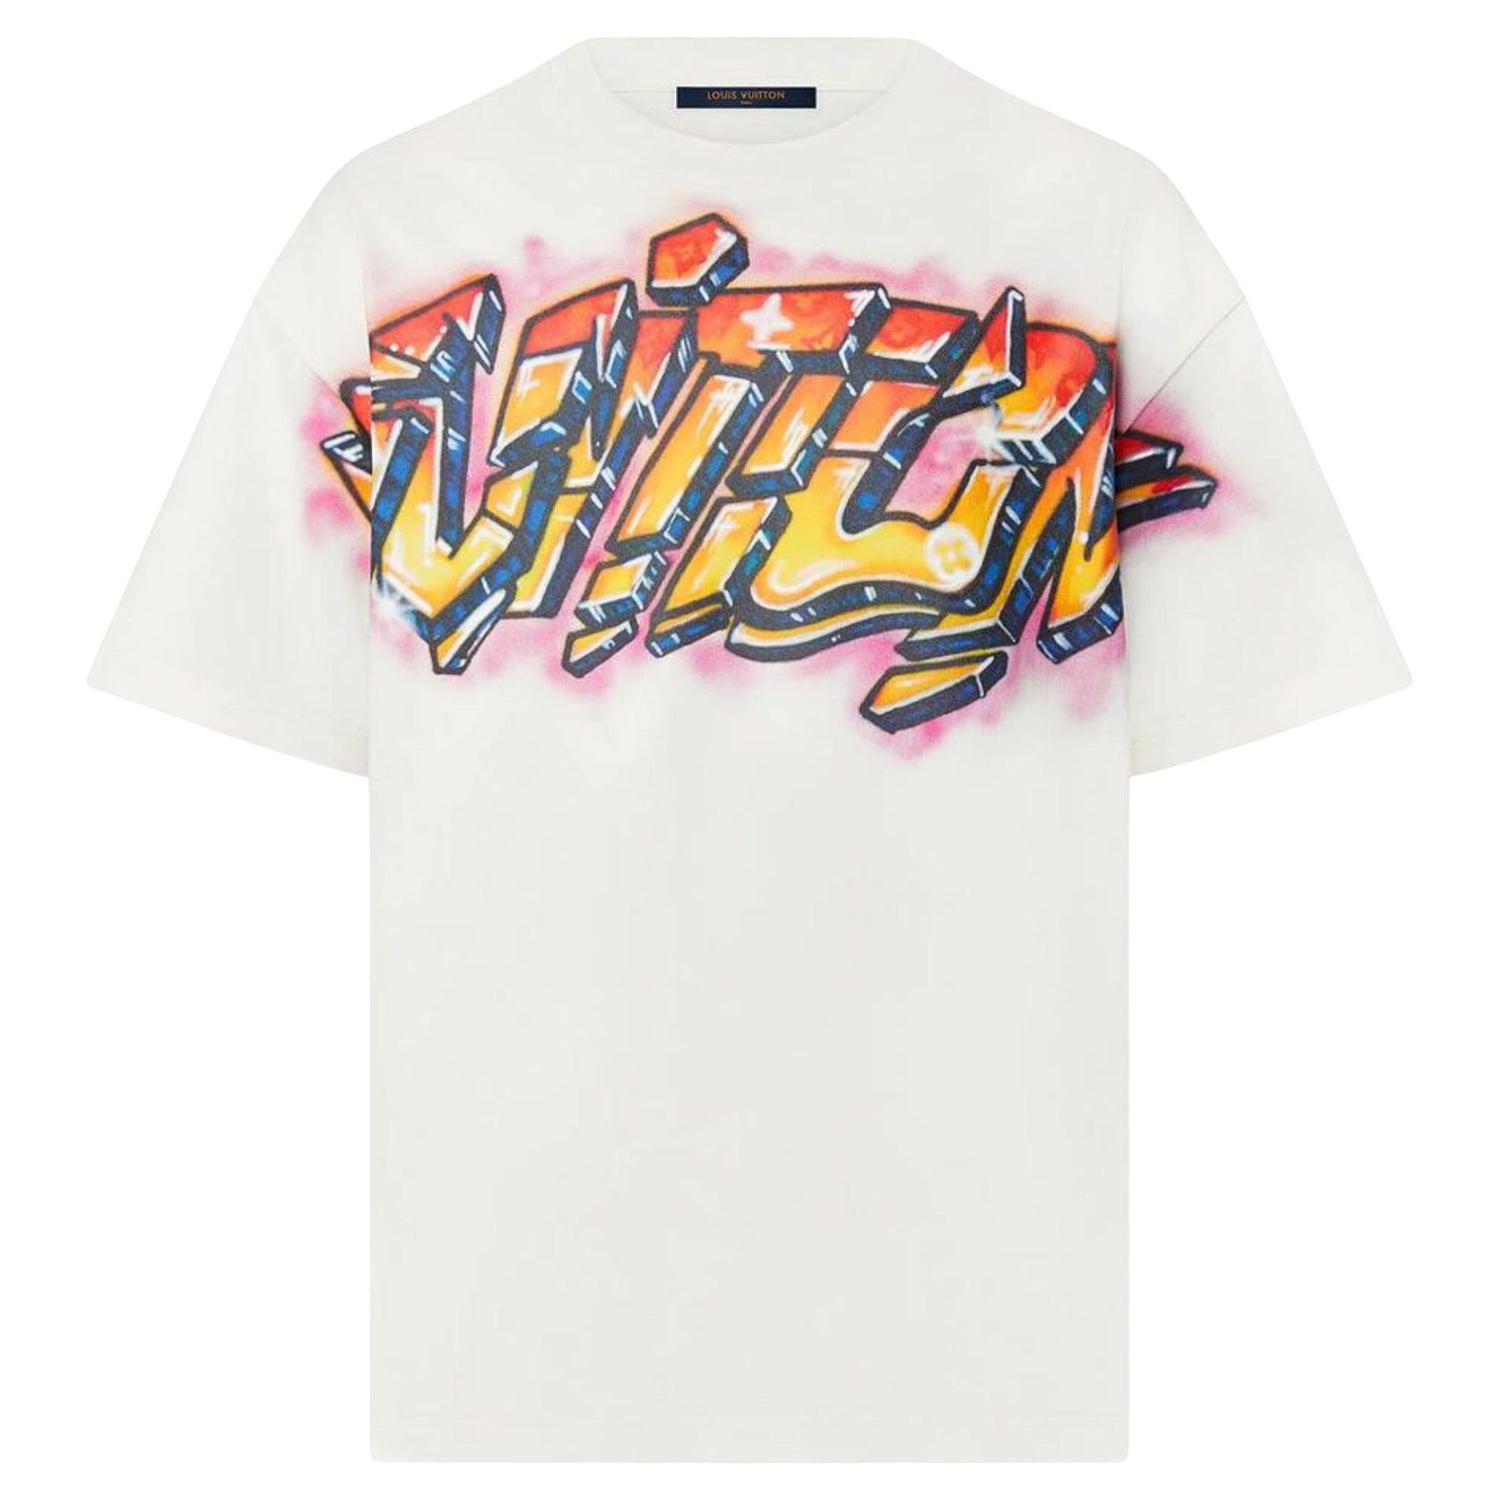 LOUIS VUITTON Graffiti T-Shirt Size S Pink X Black Auth Men Used from Japan